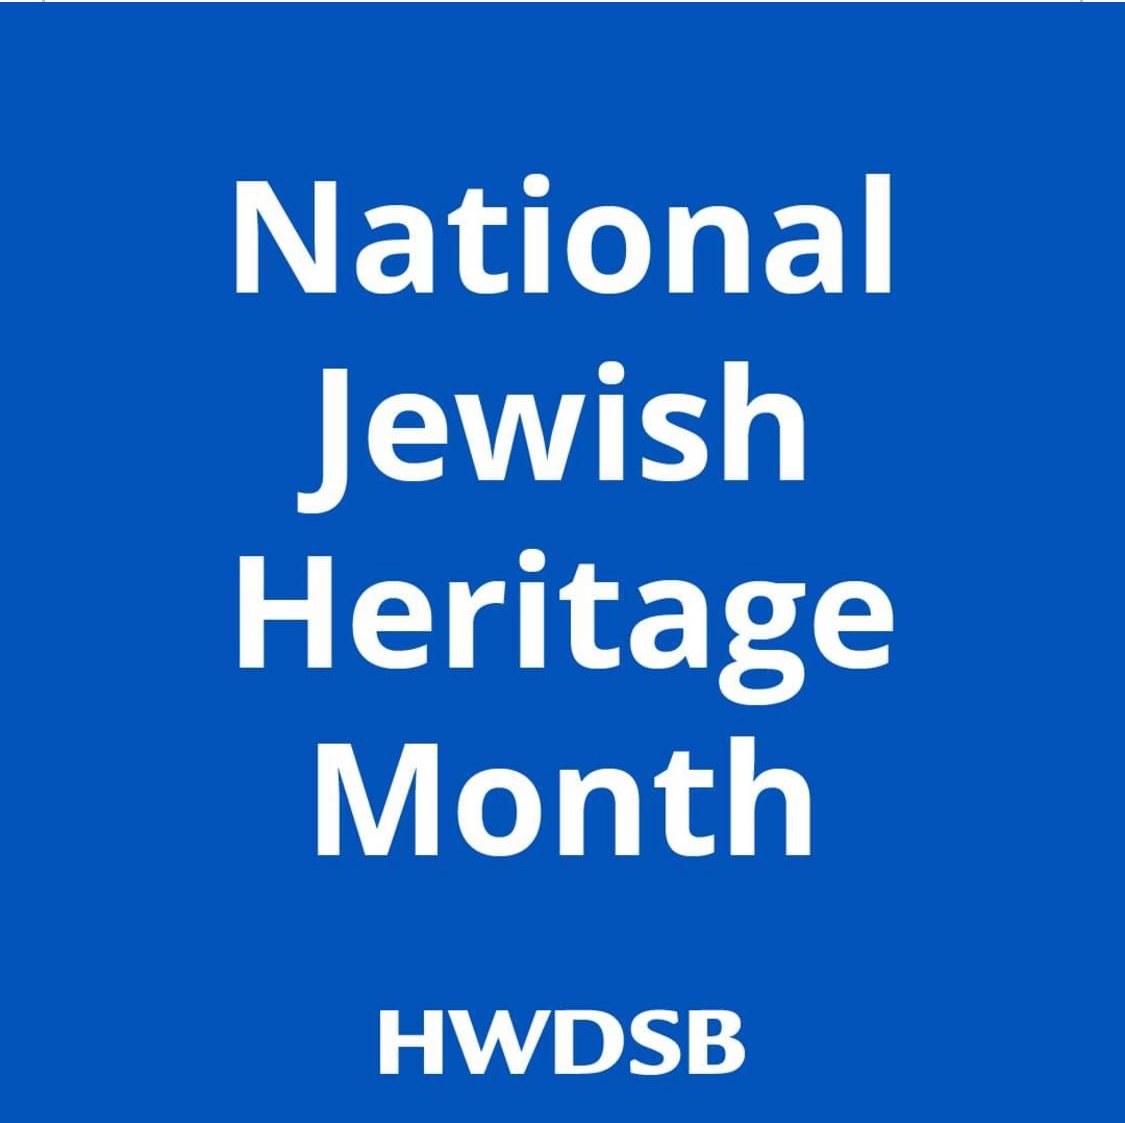 May 1 marks the beginning of Canadian Jewish Heritage Month. It’s a time to honour Jewish culture, faith, and history in Canada. Let’s recognize the role that Jewish Canadians have played, and continue to play, in communities across our great country.